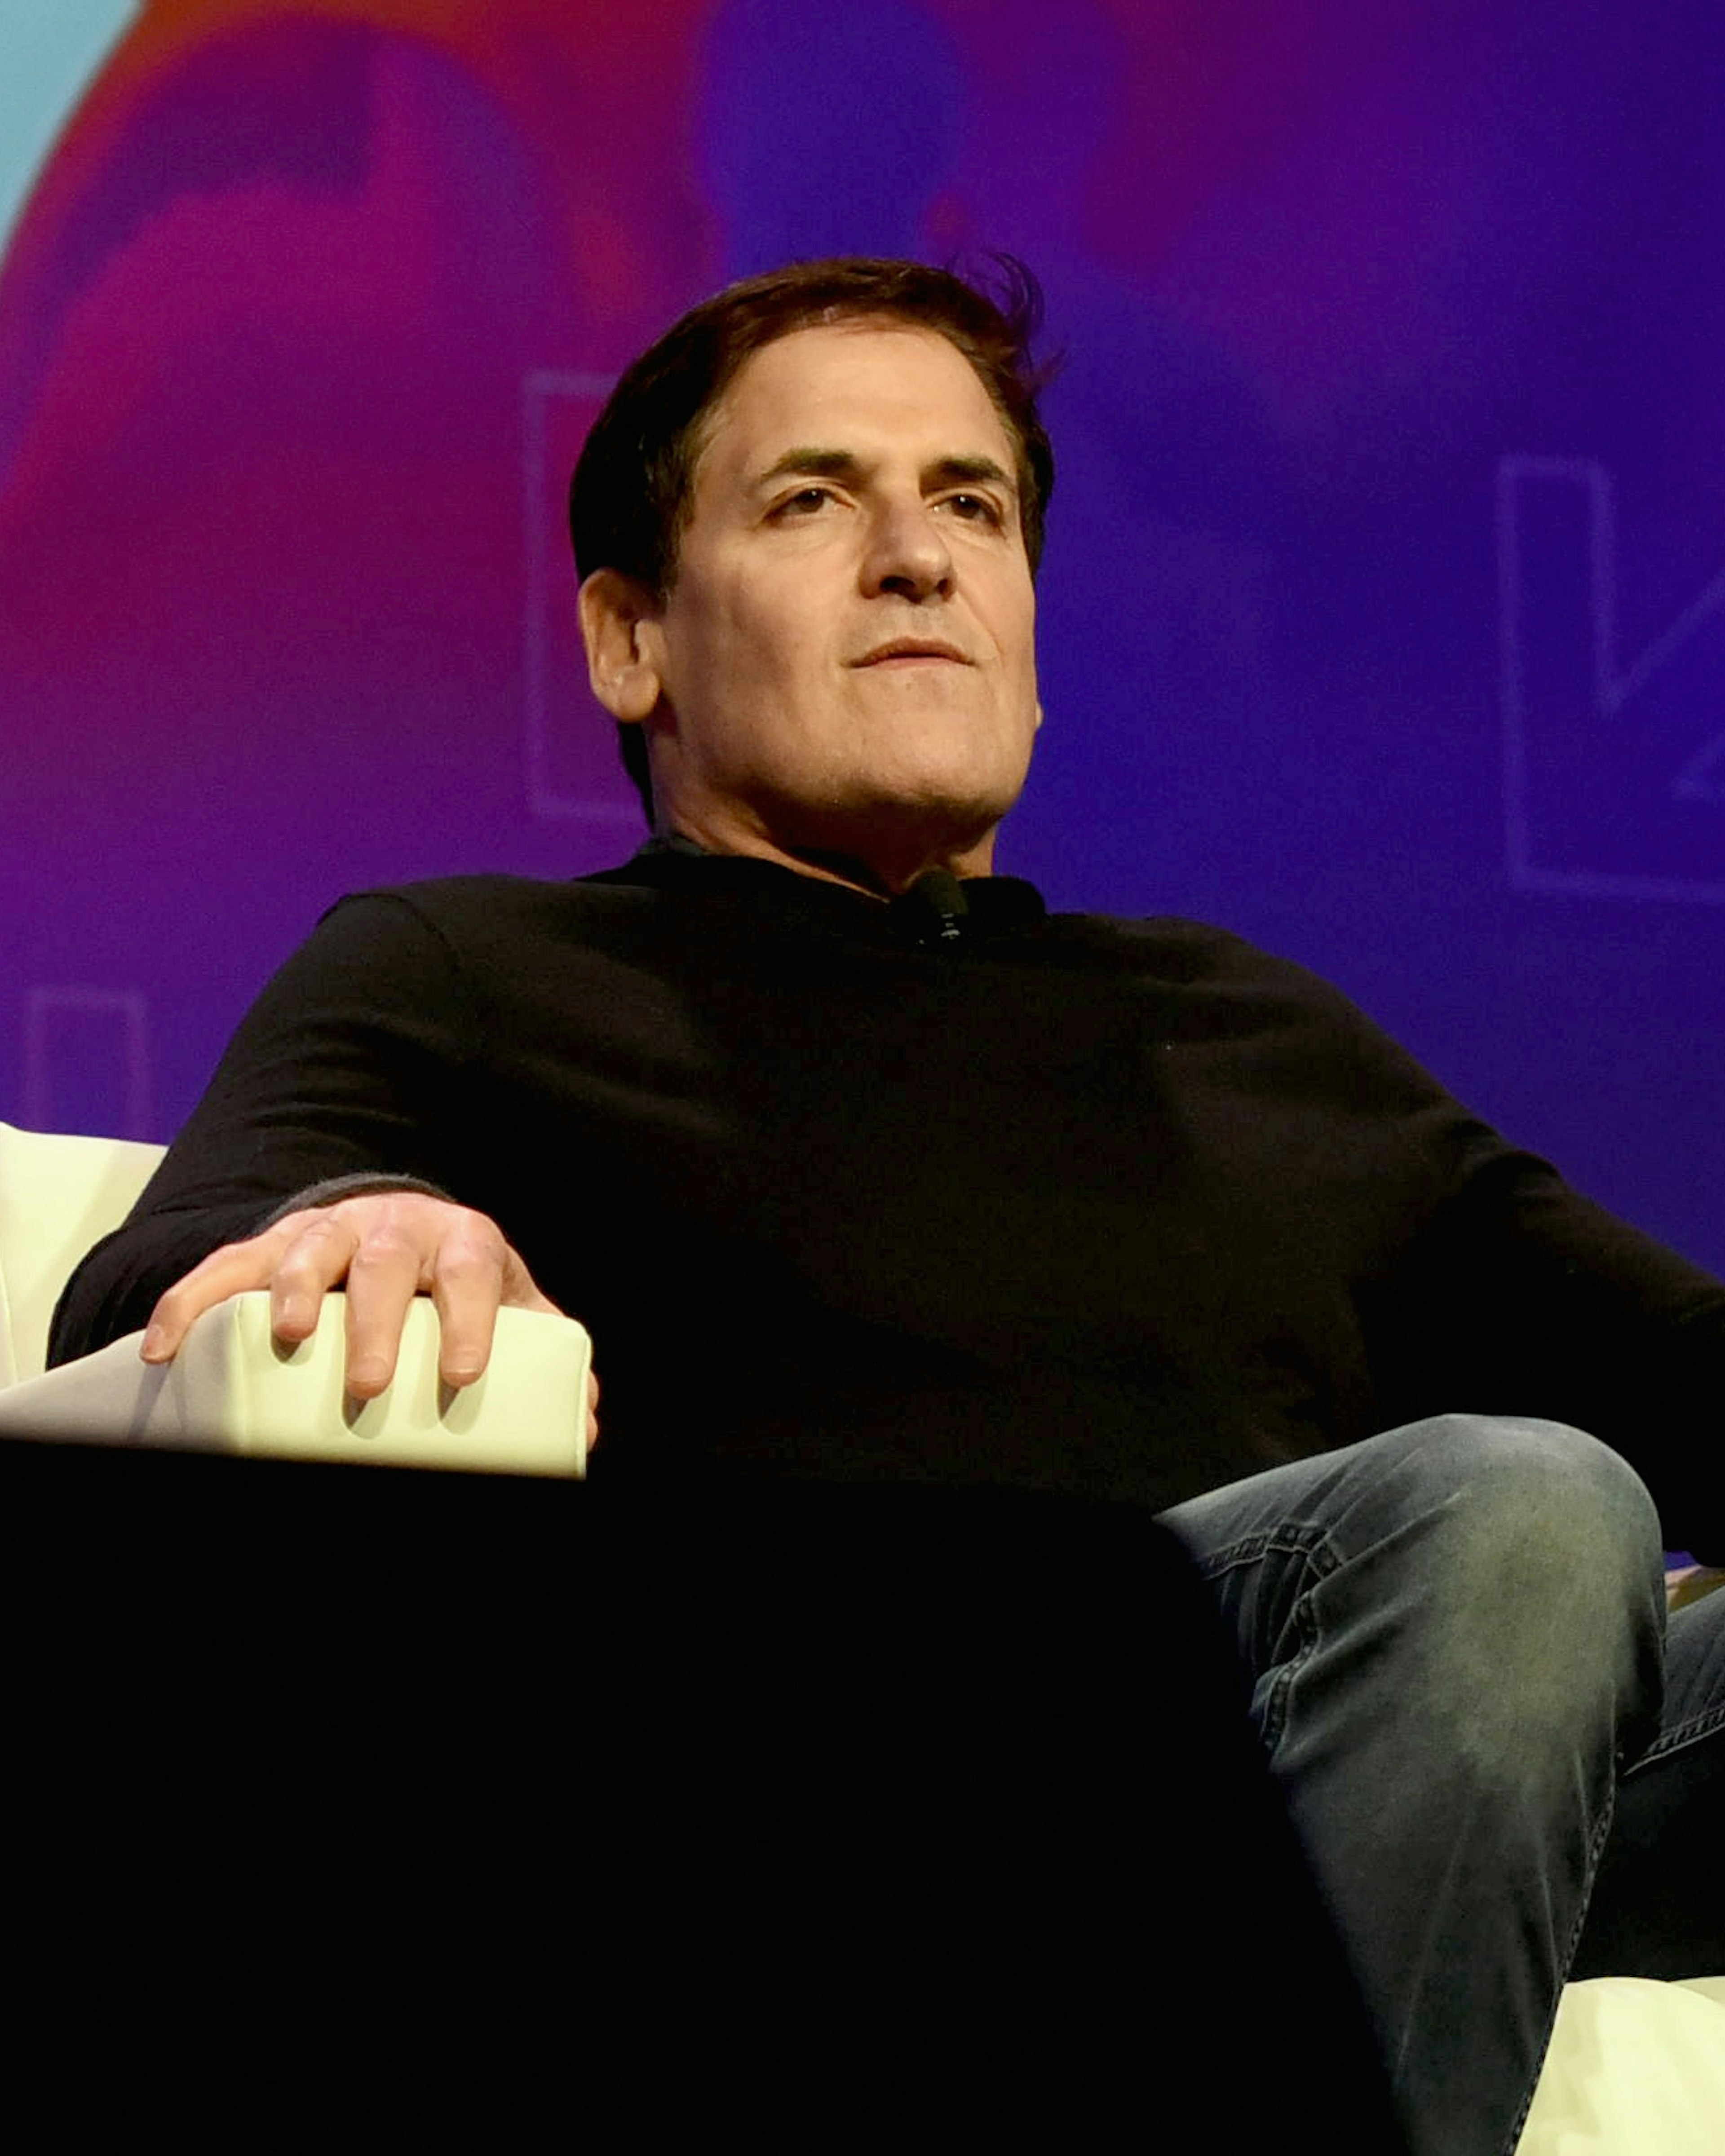 AUSTIN, TX - MARCH 12: Businessman Mark Cuban speaks onstage at 'Mark Cuban &amp; Tech Execs: Is Govt Disrupting Disruption?' during 2017 SXSW Conference and Festivals at Austin Convention Center on March 12, 2017 in Austin, Texas. (Photo by JEALEX Photo/Getty Images for SXSW)